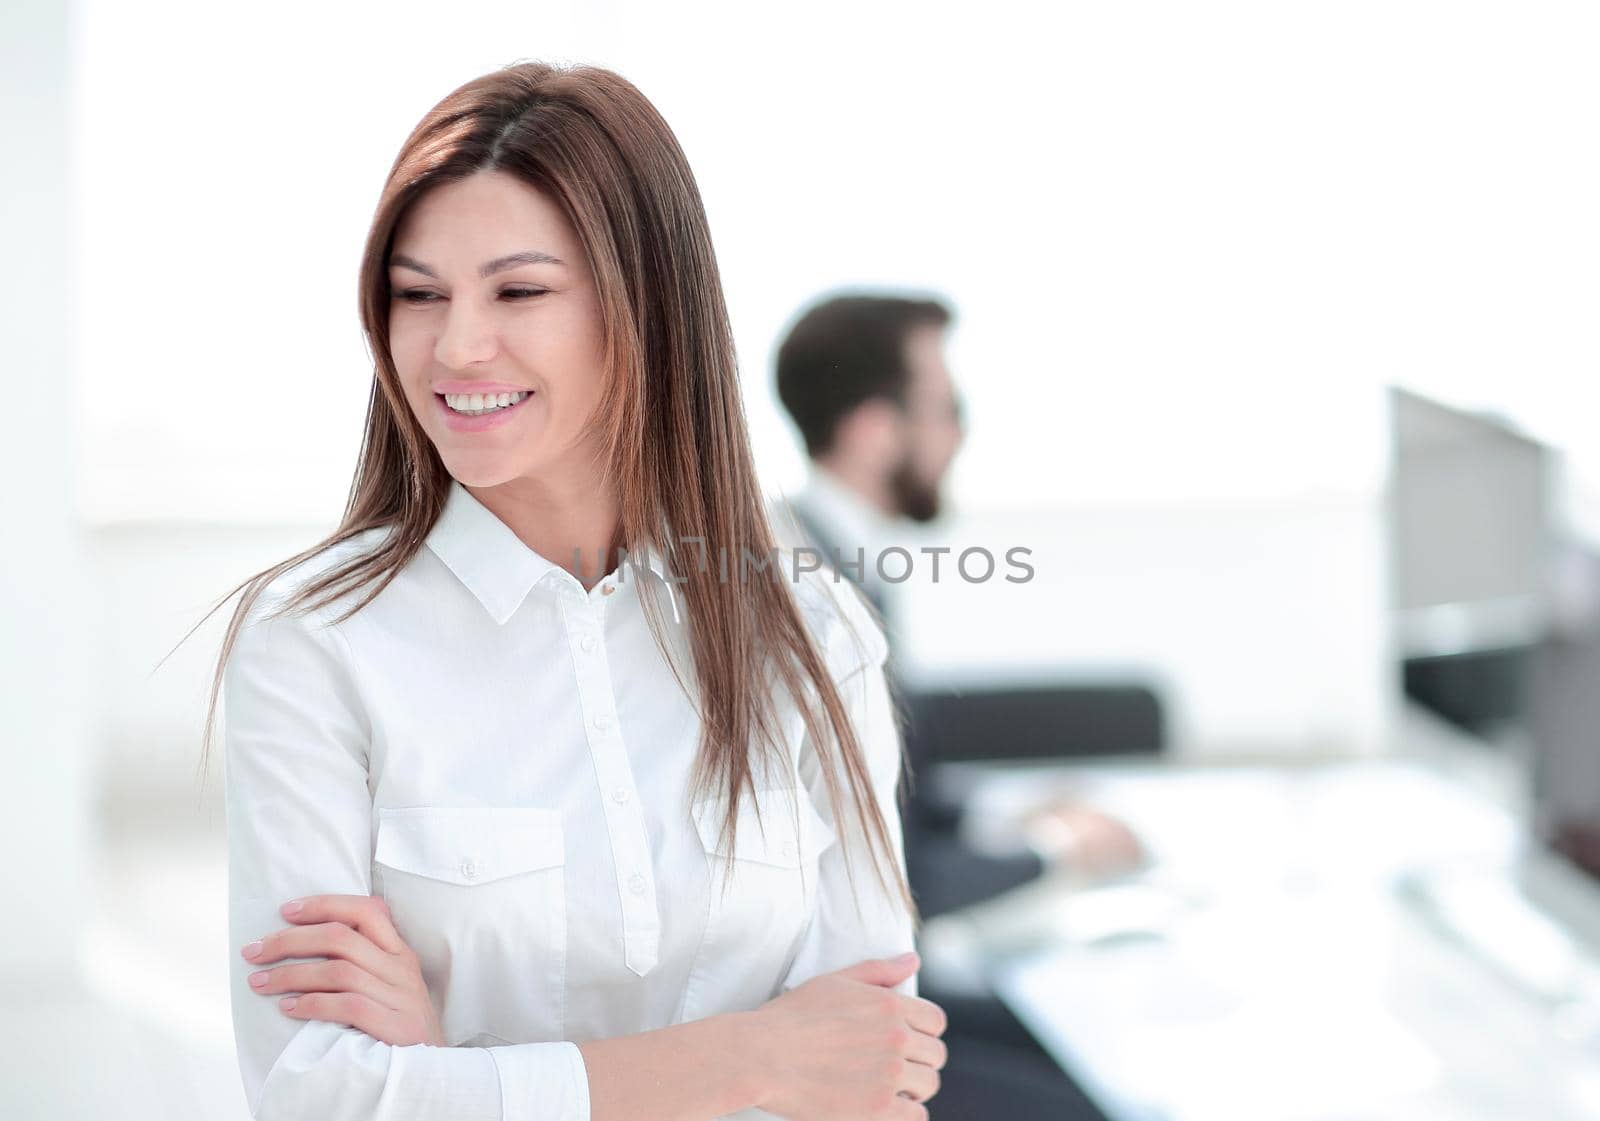 smiling business woman on the background of the workplace. photo with copy space